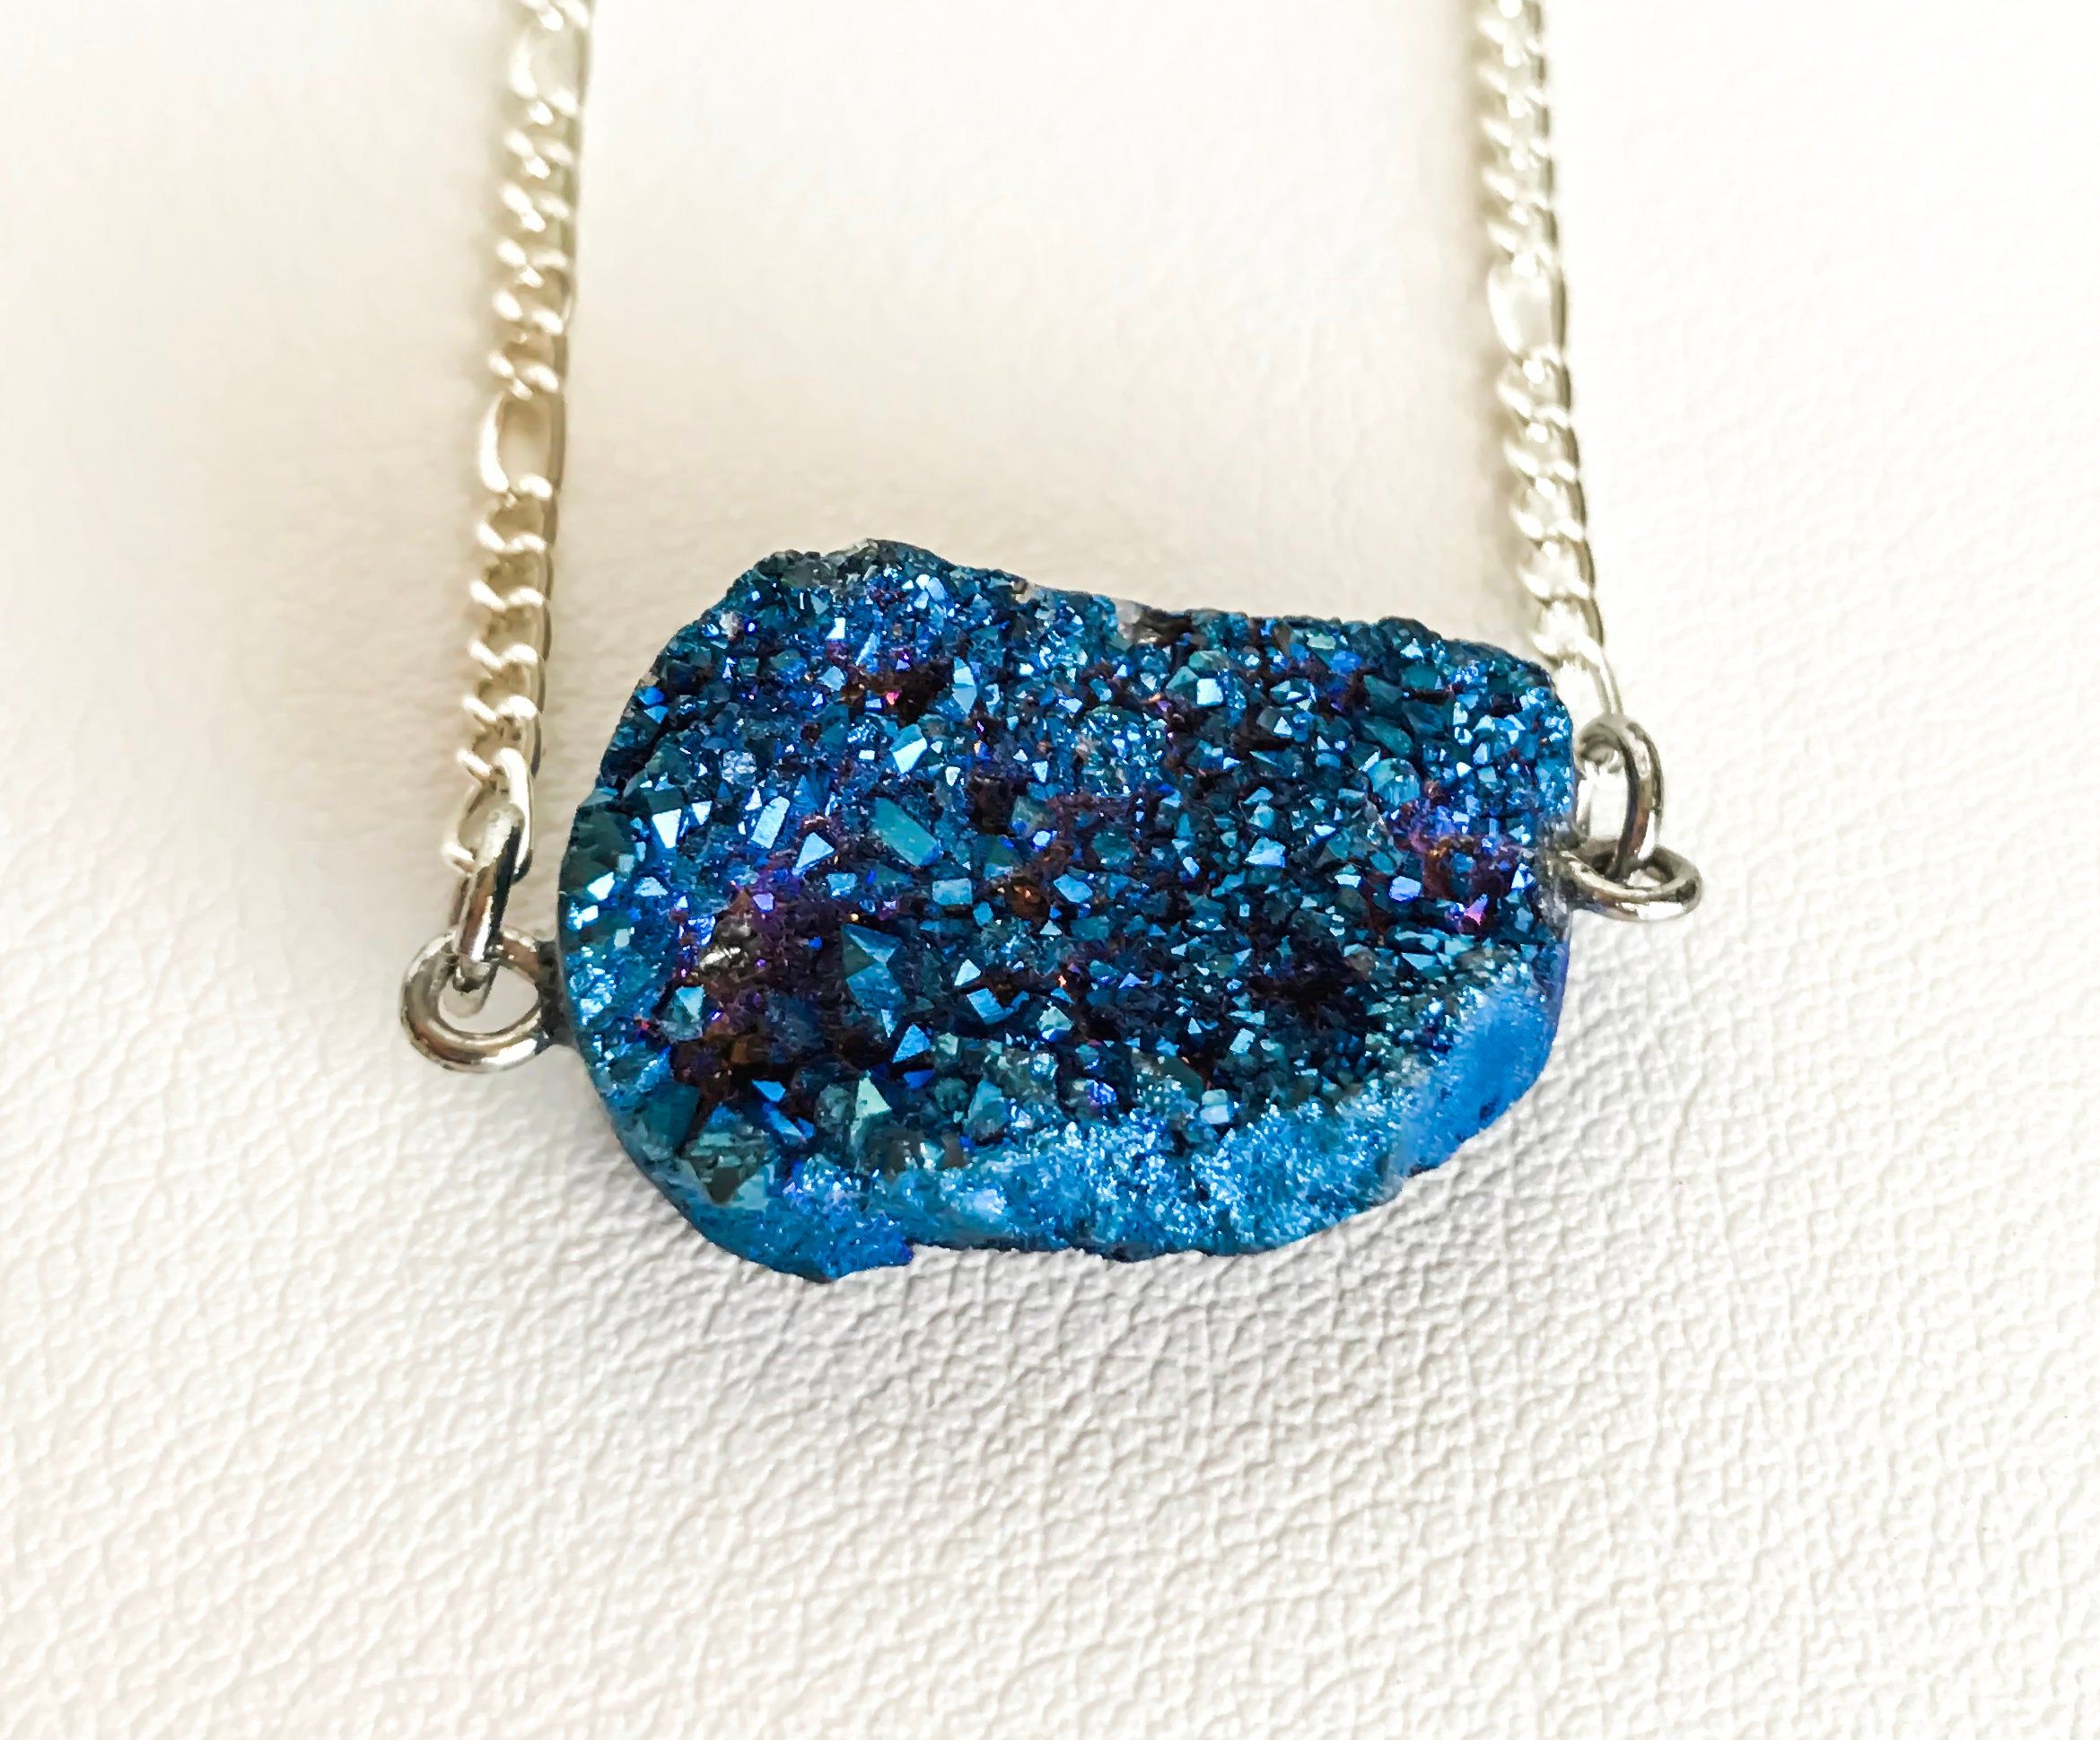 Blue Sparkle Stone Pendant Necklace In Most Up To Date Sparkling Stones Pendant Necklaces (View 22 of 25)